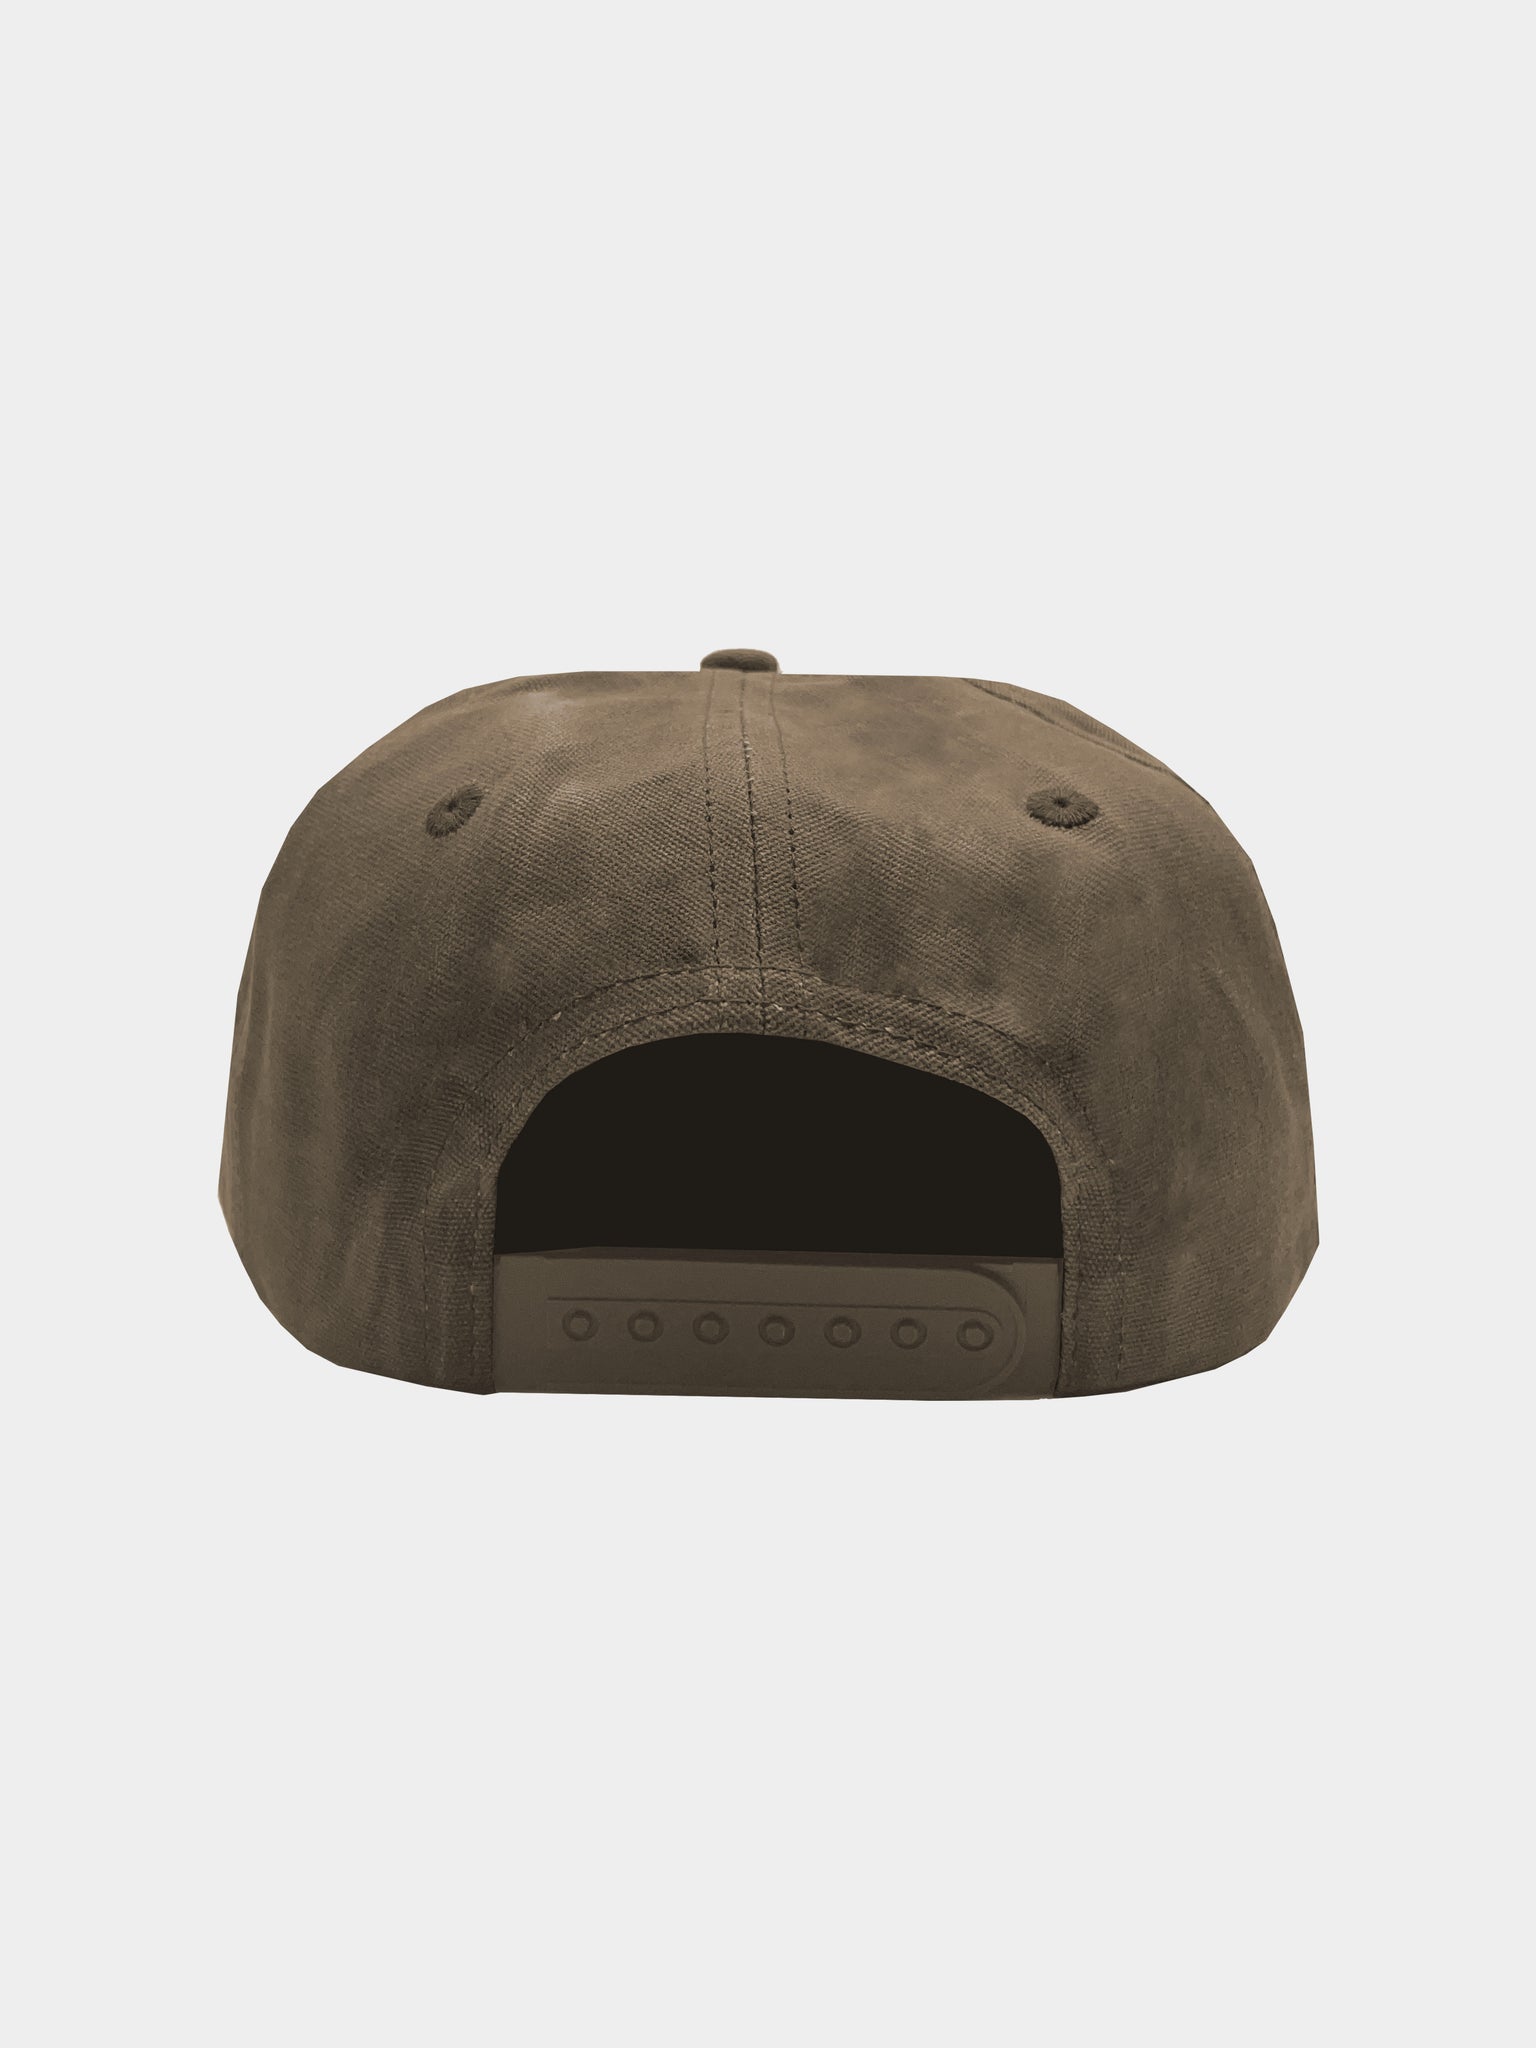 Canyon Meadows Ranch Waxed Canvas Hat